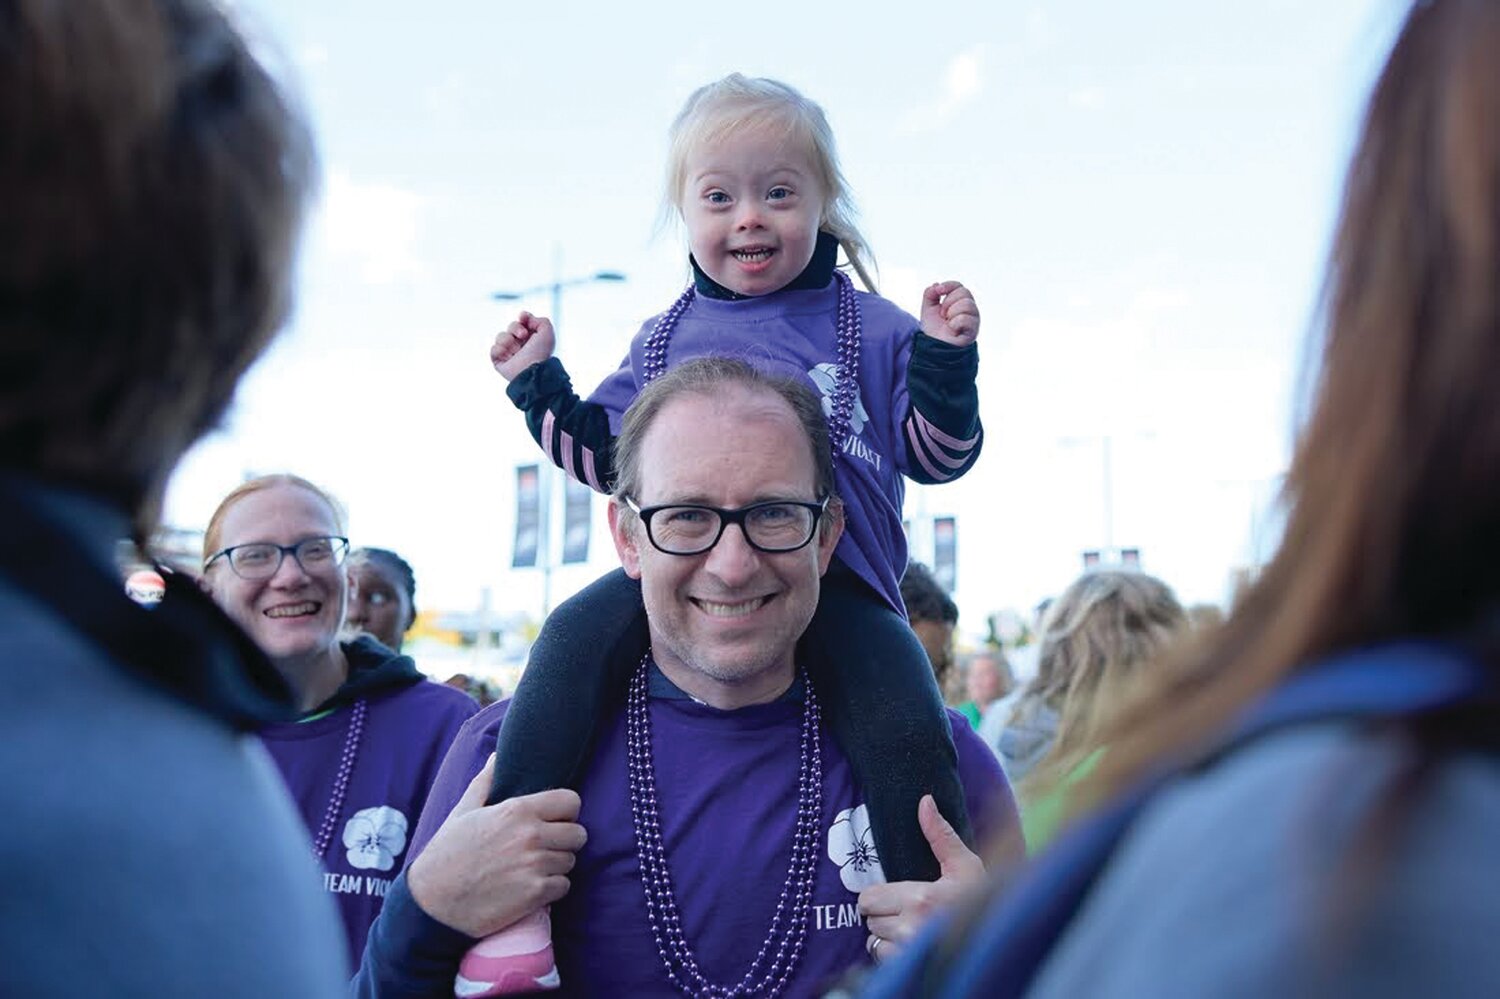 Bucks County Herald Editor John Anastasi carries daughter Violet, 3, on his shoulders at the Oct. 8 Buddy Walk at Lincoln Financial Field to benefit the Trisomy 21 Clinic at Children’s Hospital of Philadelphia. October is Down Syndrome Awareness Month.